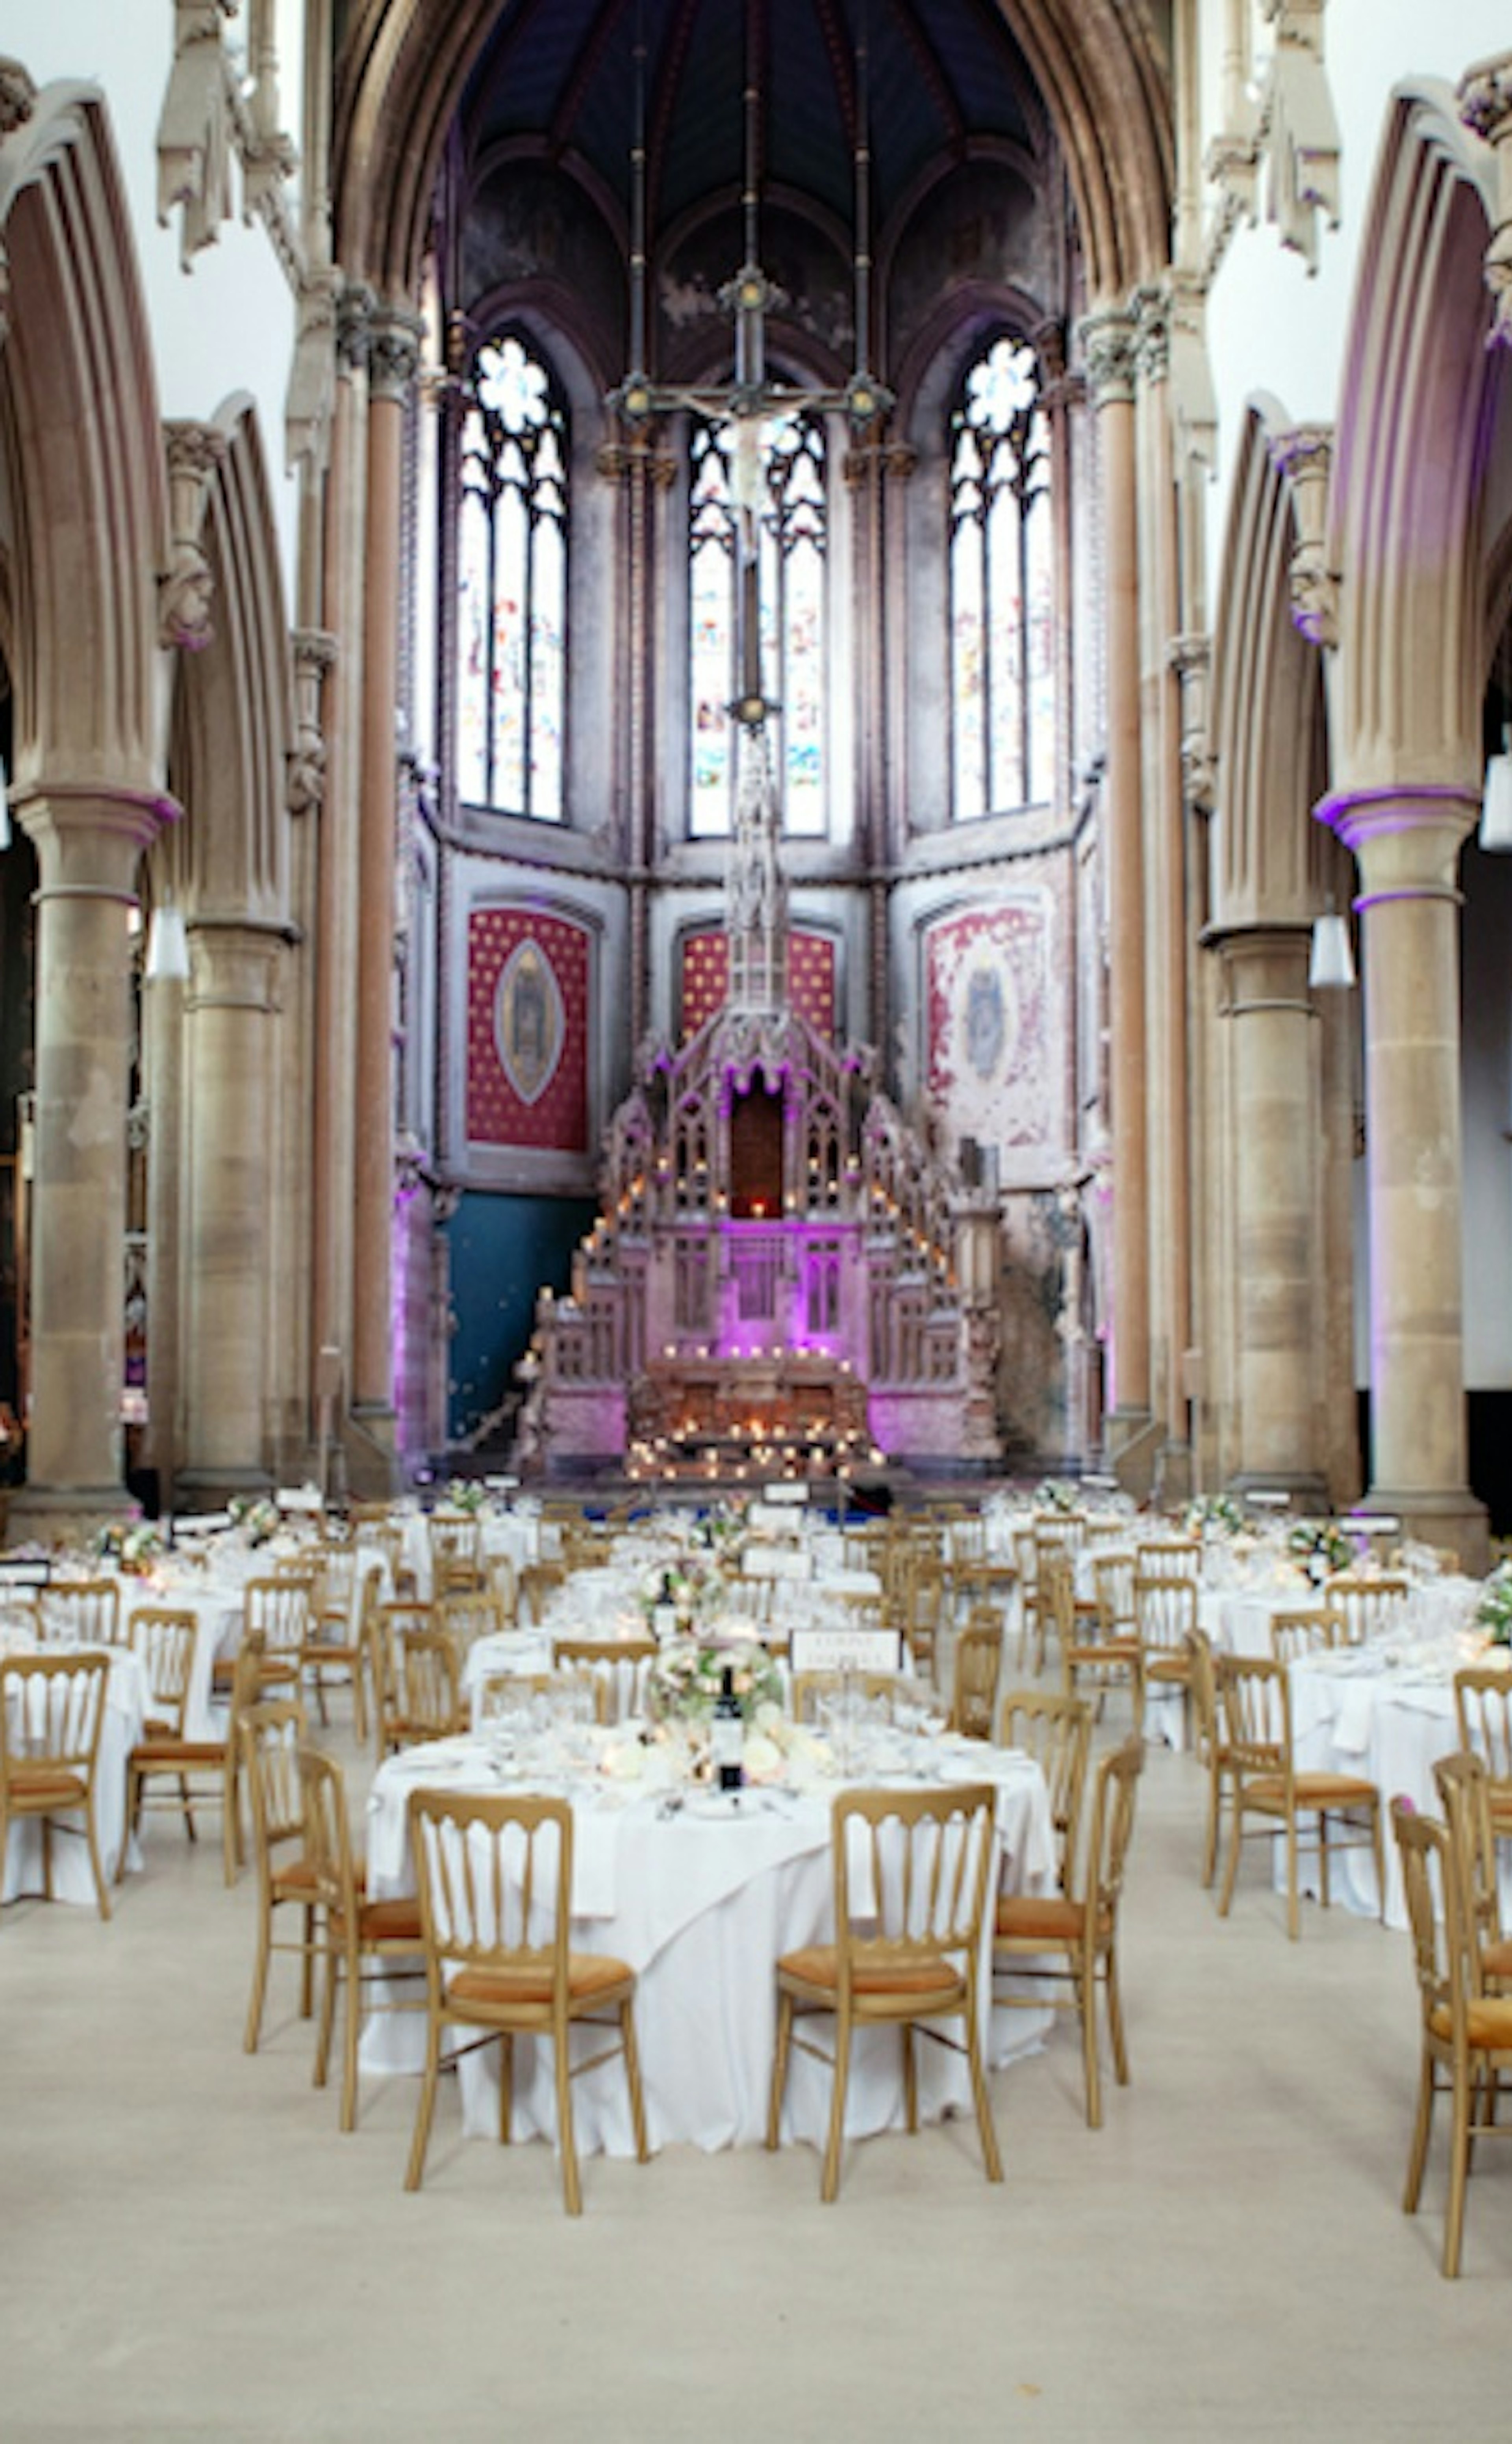 Product Launch Venues - The Monastery Manchester